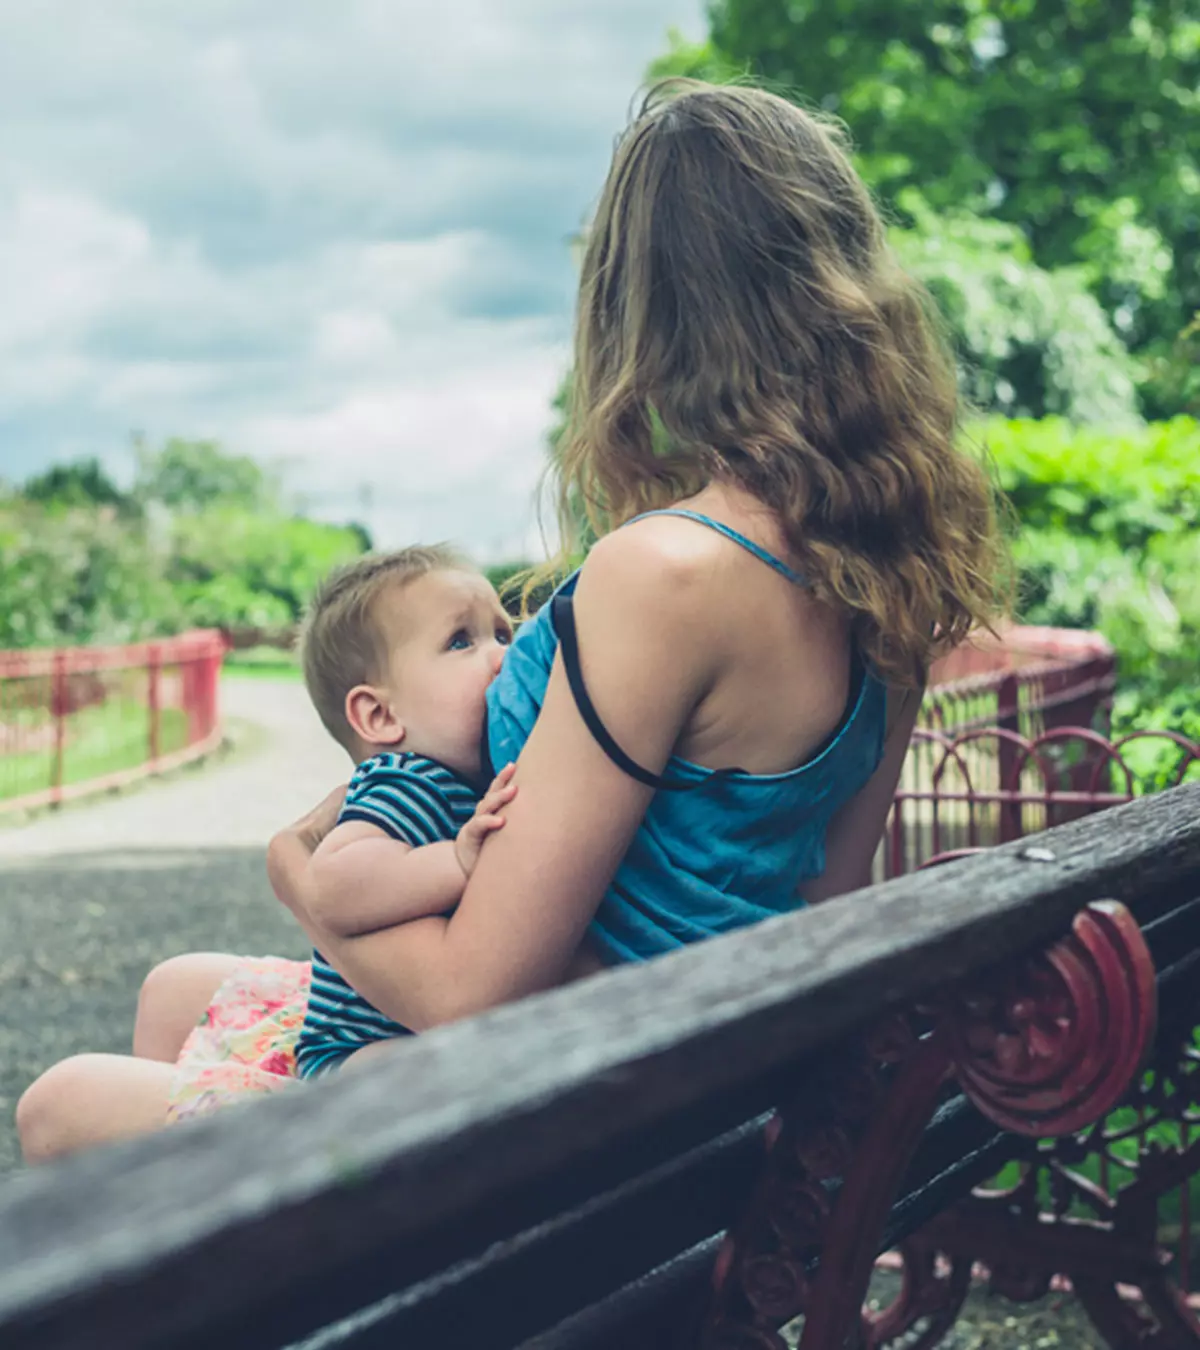 Could 2021 Be The Year We Start Normalizing Breastfeeding?